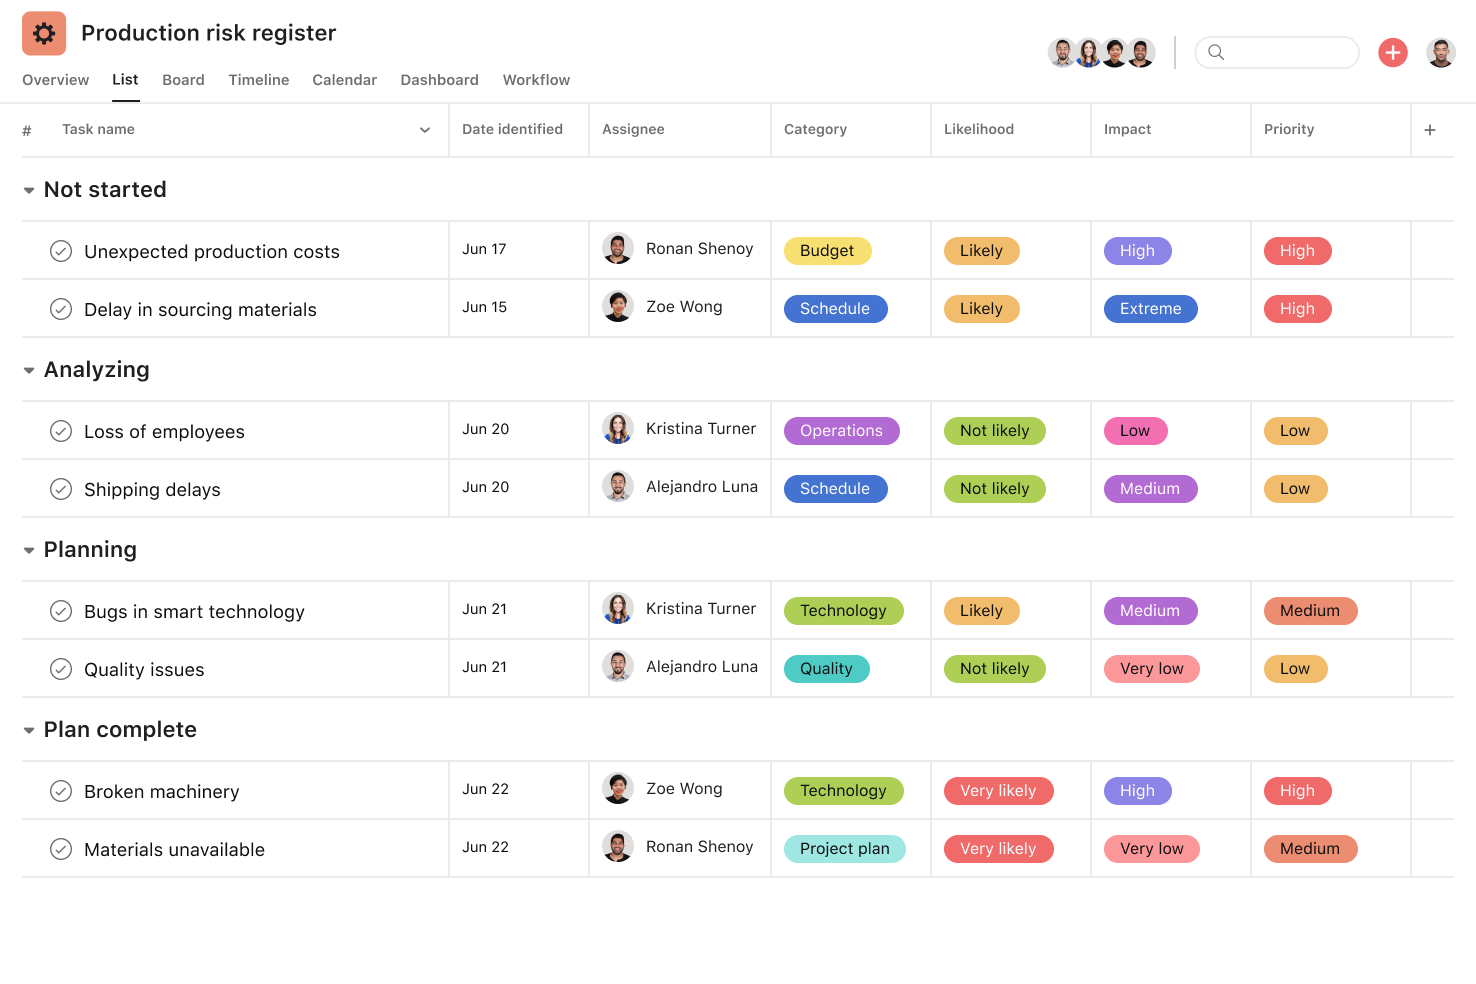 [product ui] Production risk register in Asana, spreadsheet-style project view (List)